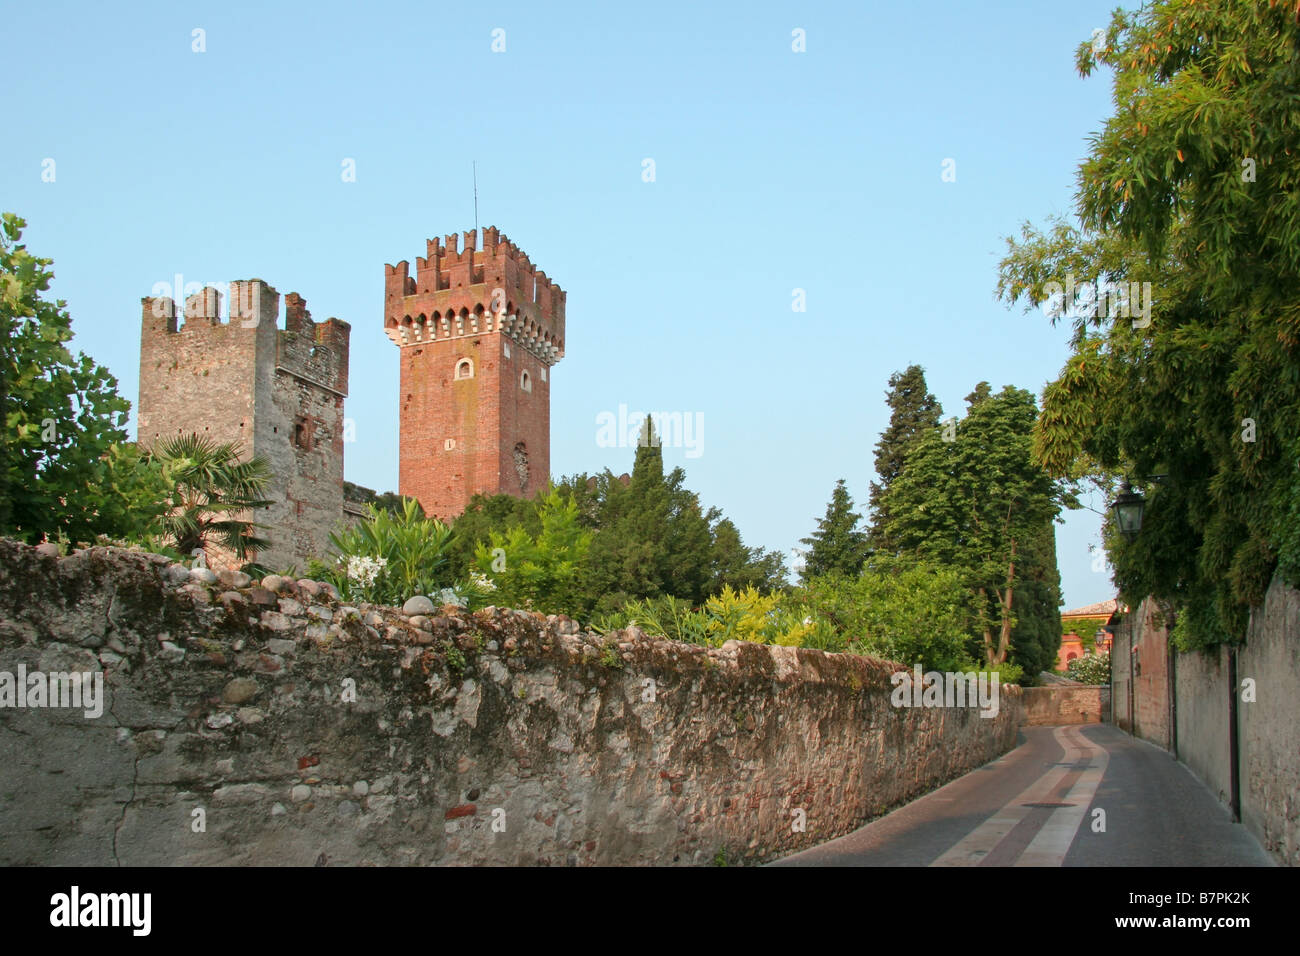 Castello Scaligero in Lazise forms part of the boundry walls which surround the town Stock Photo